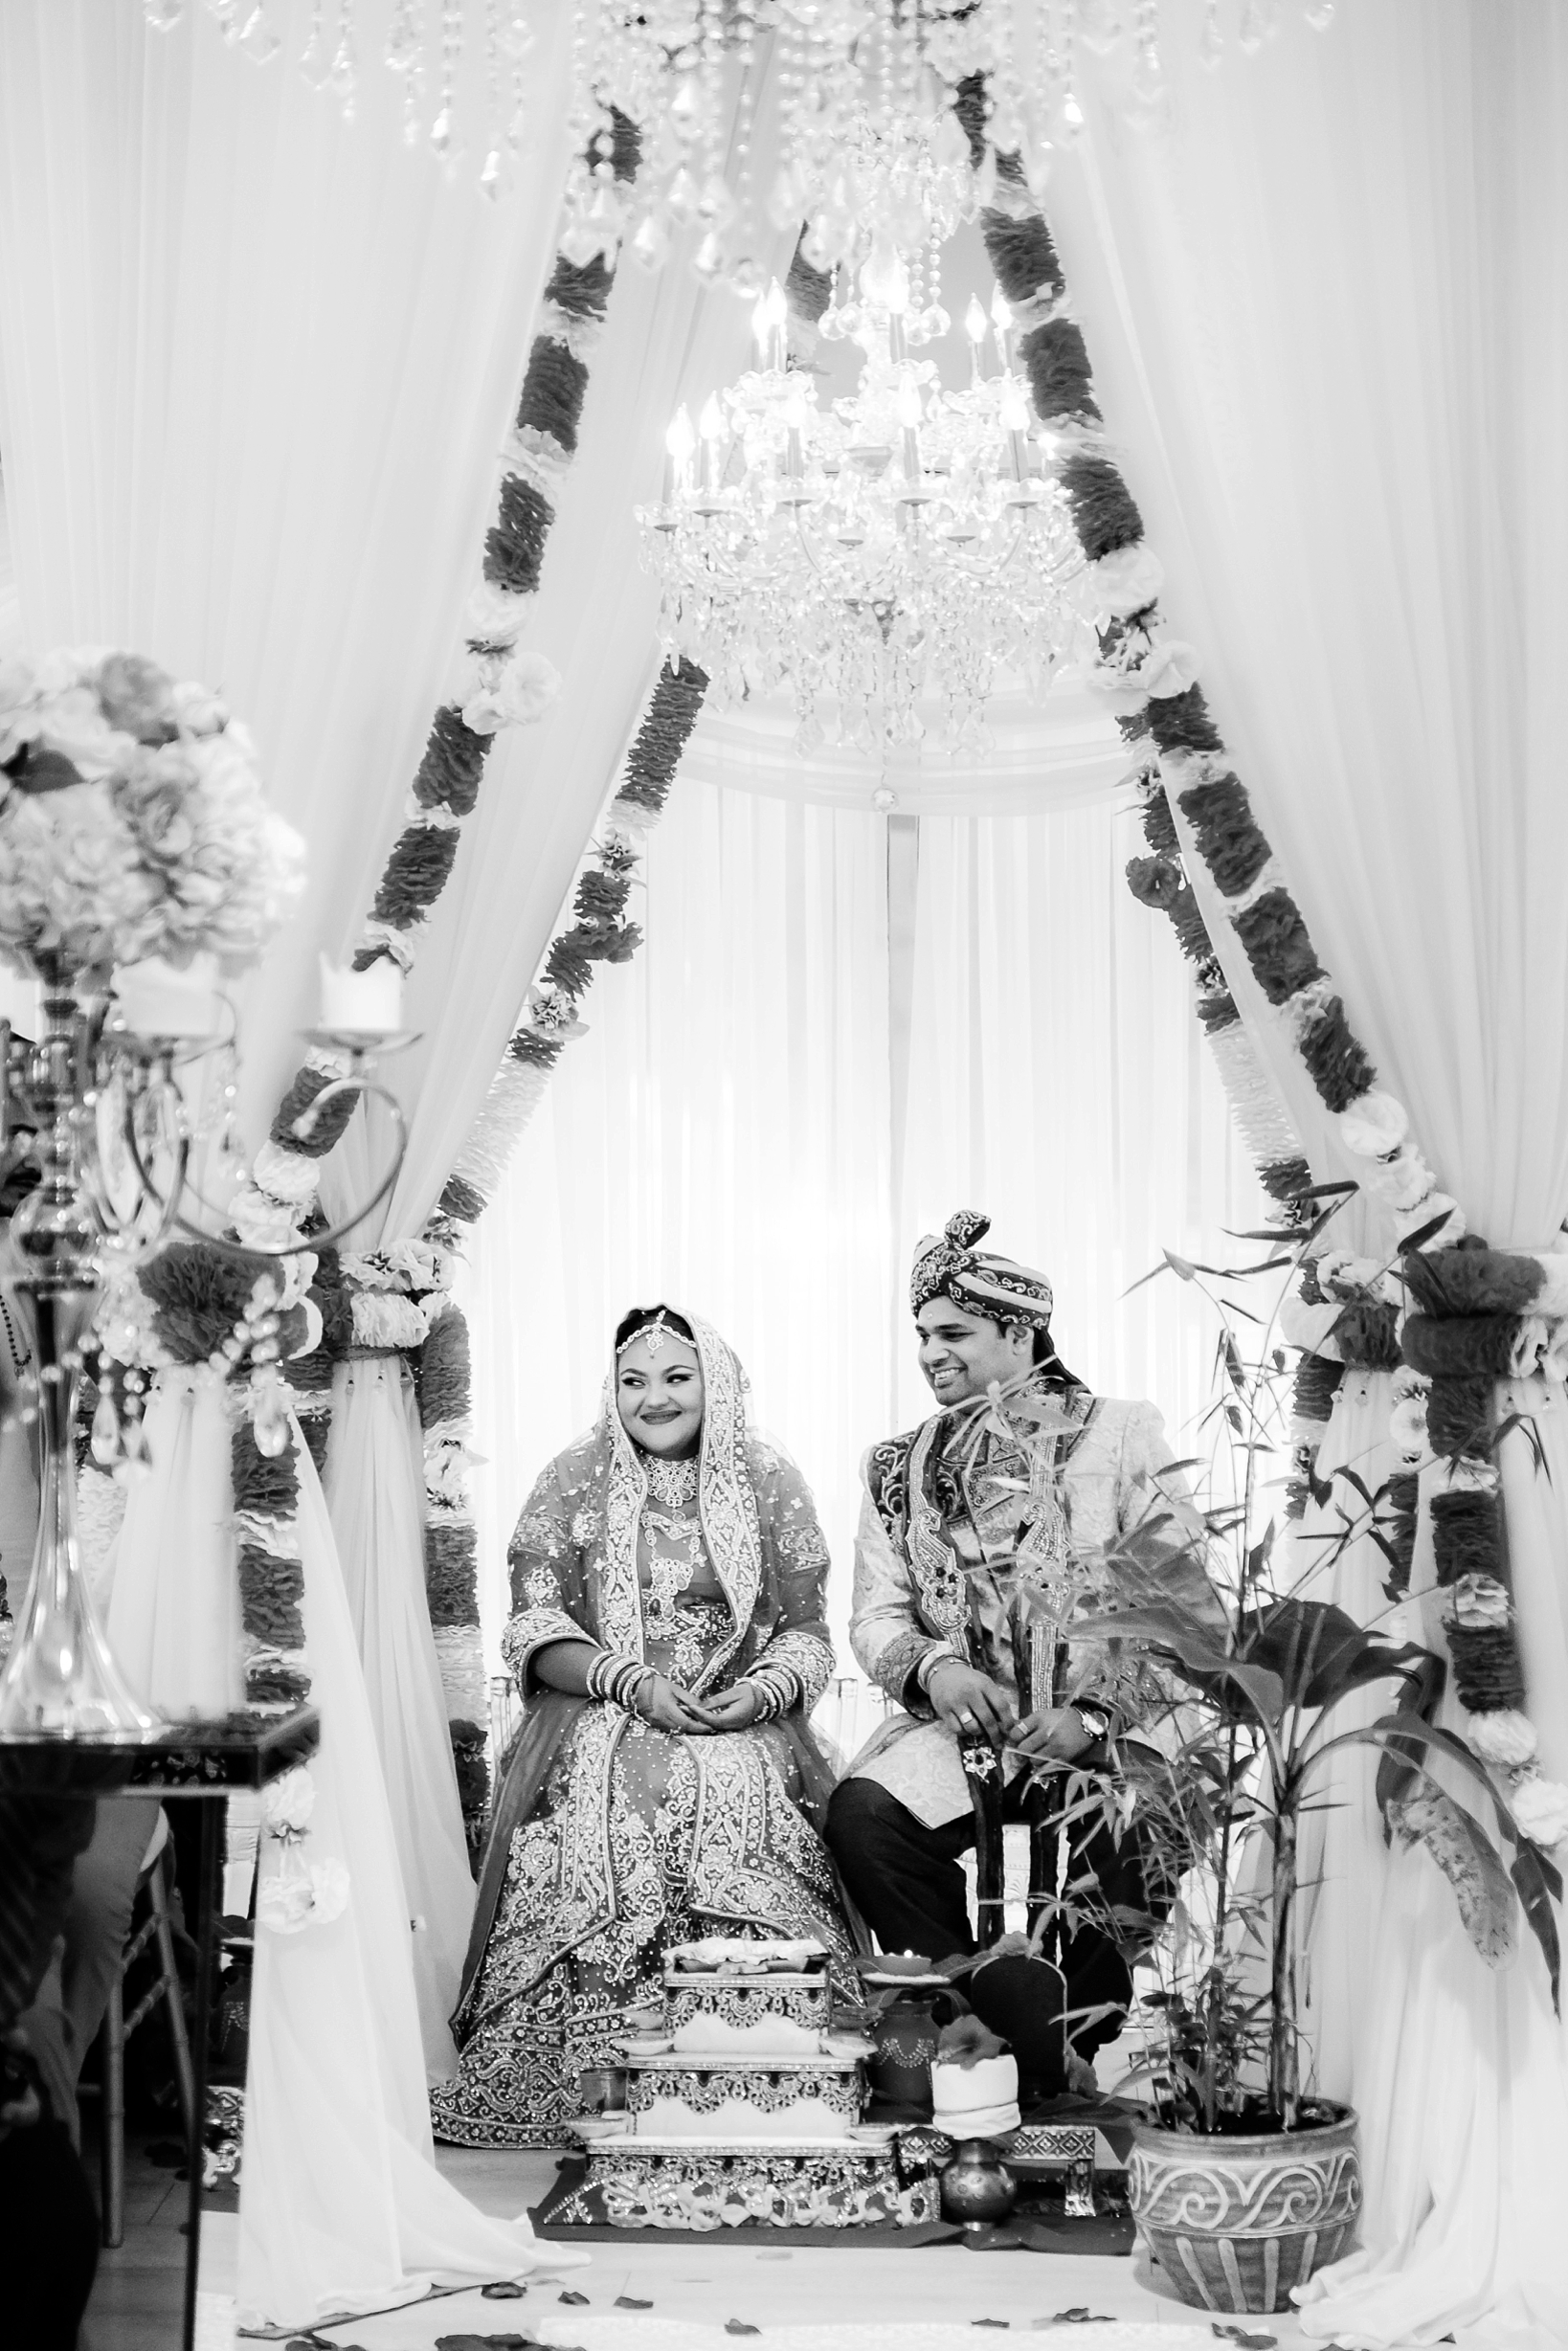 The bride and groom greet their guests under the altar in black and white